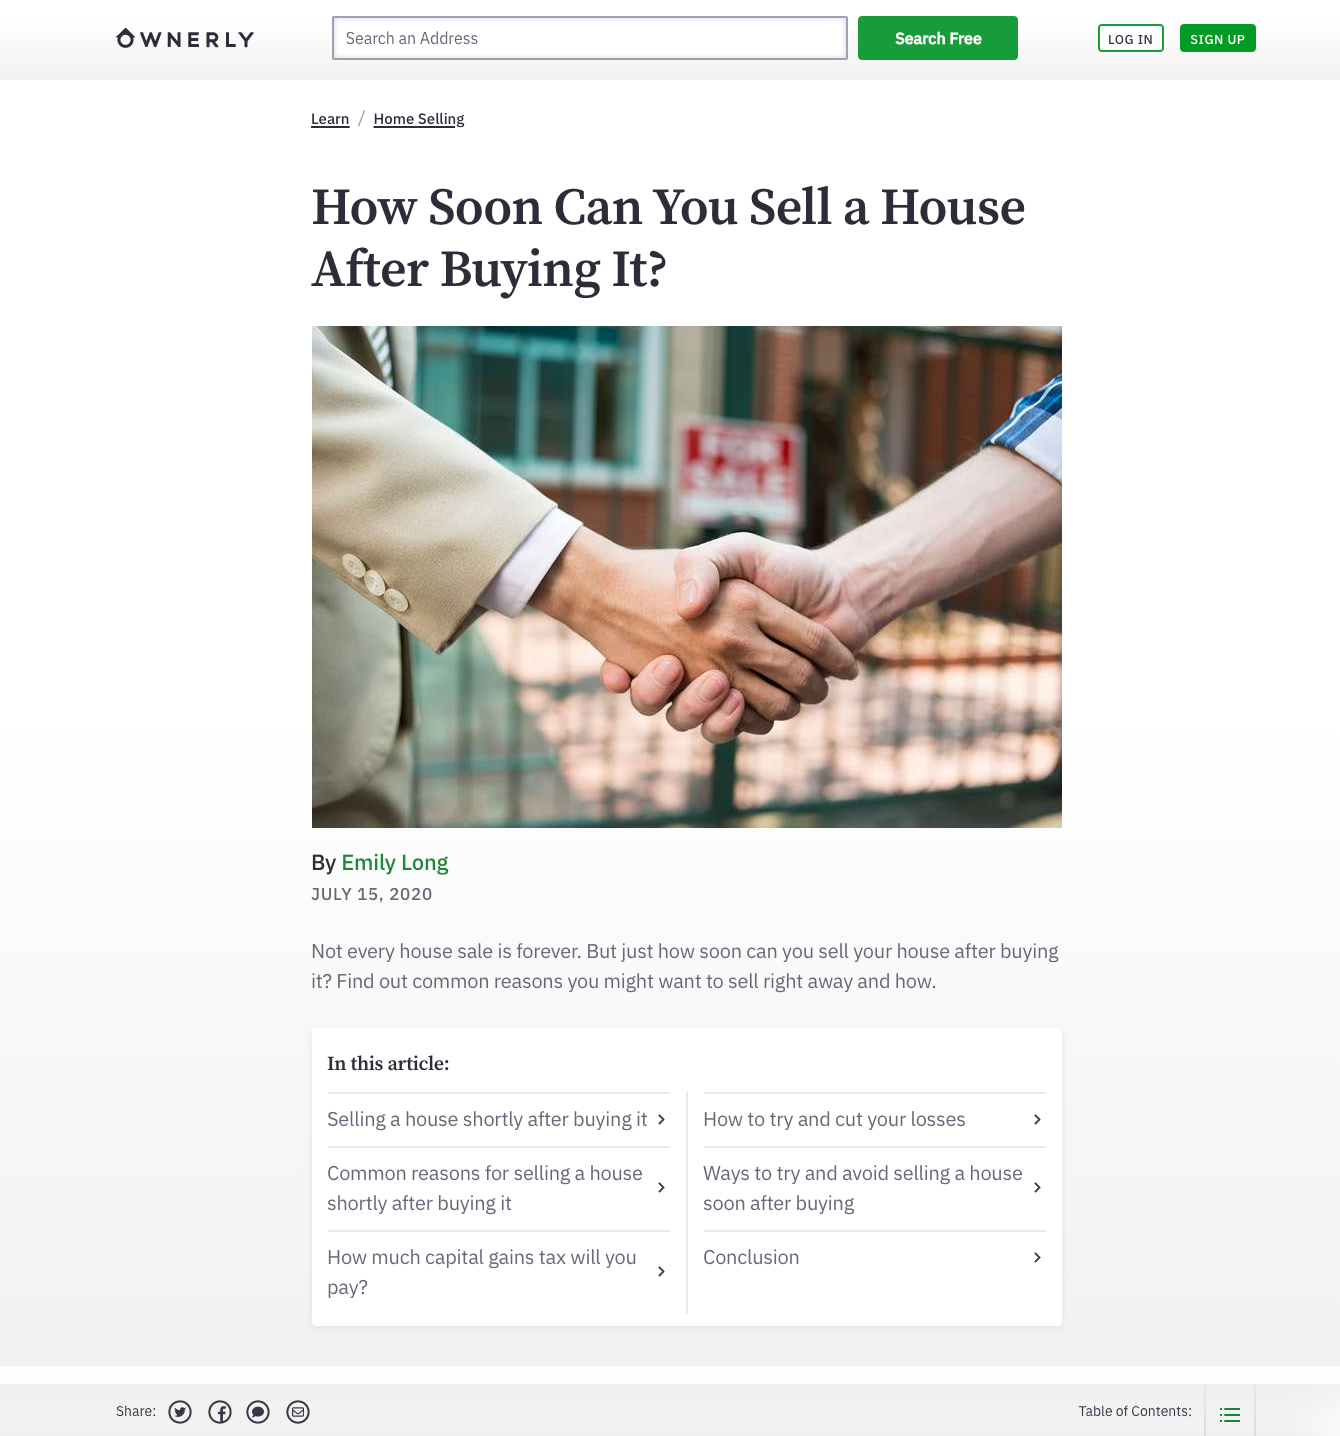 Ownerly: How Soon Can You Sell a House After Buying It?